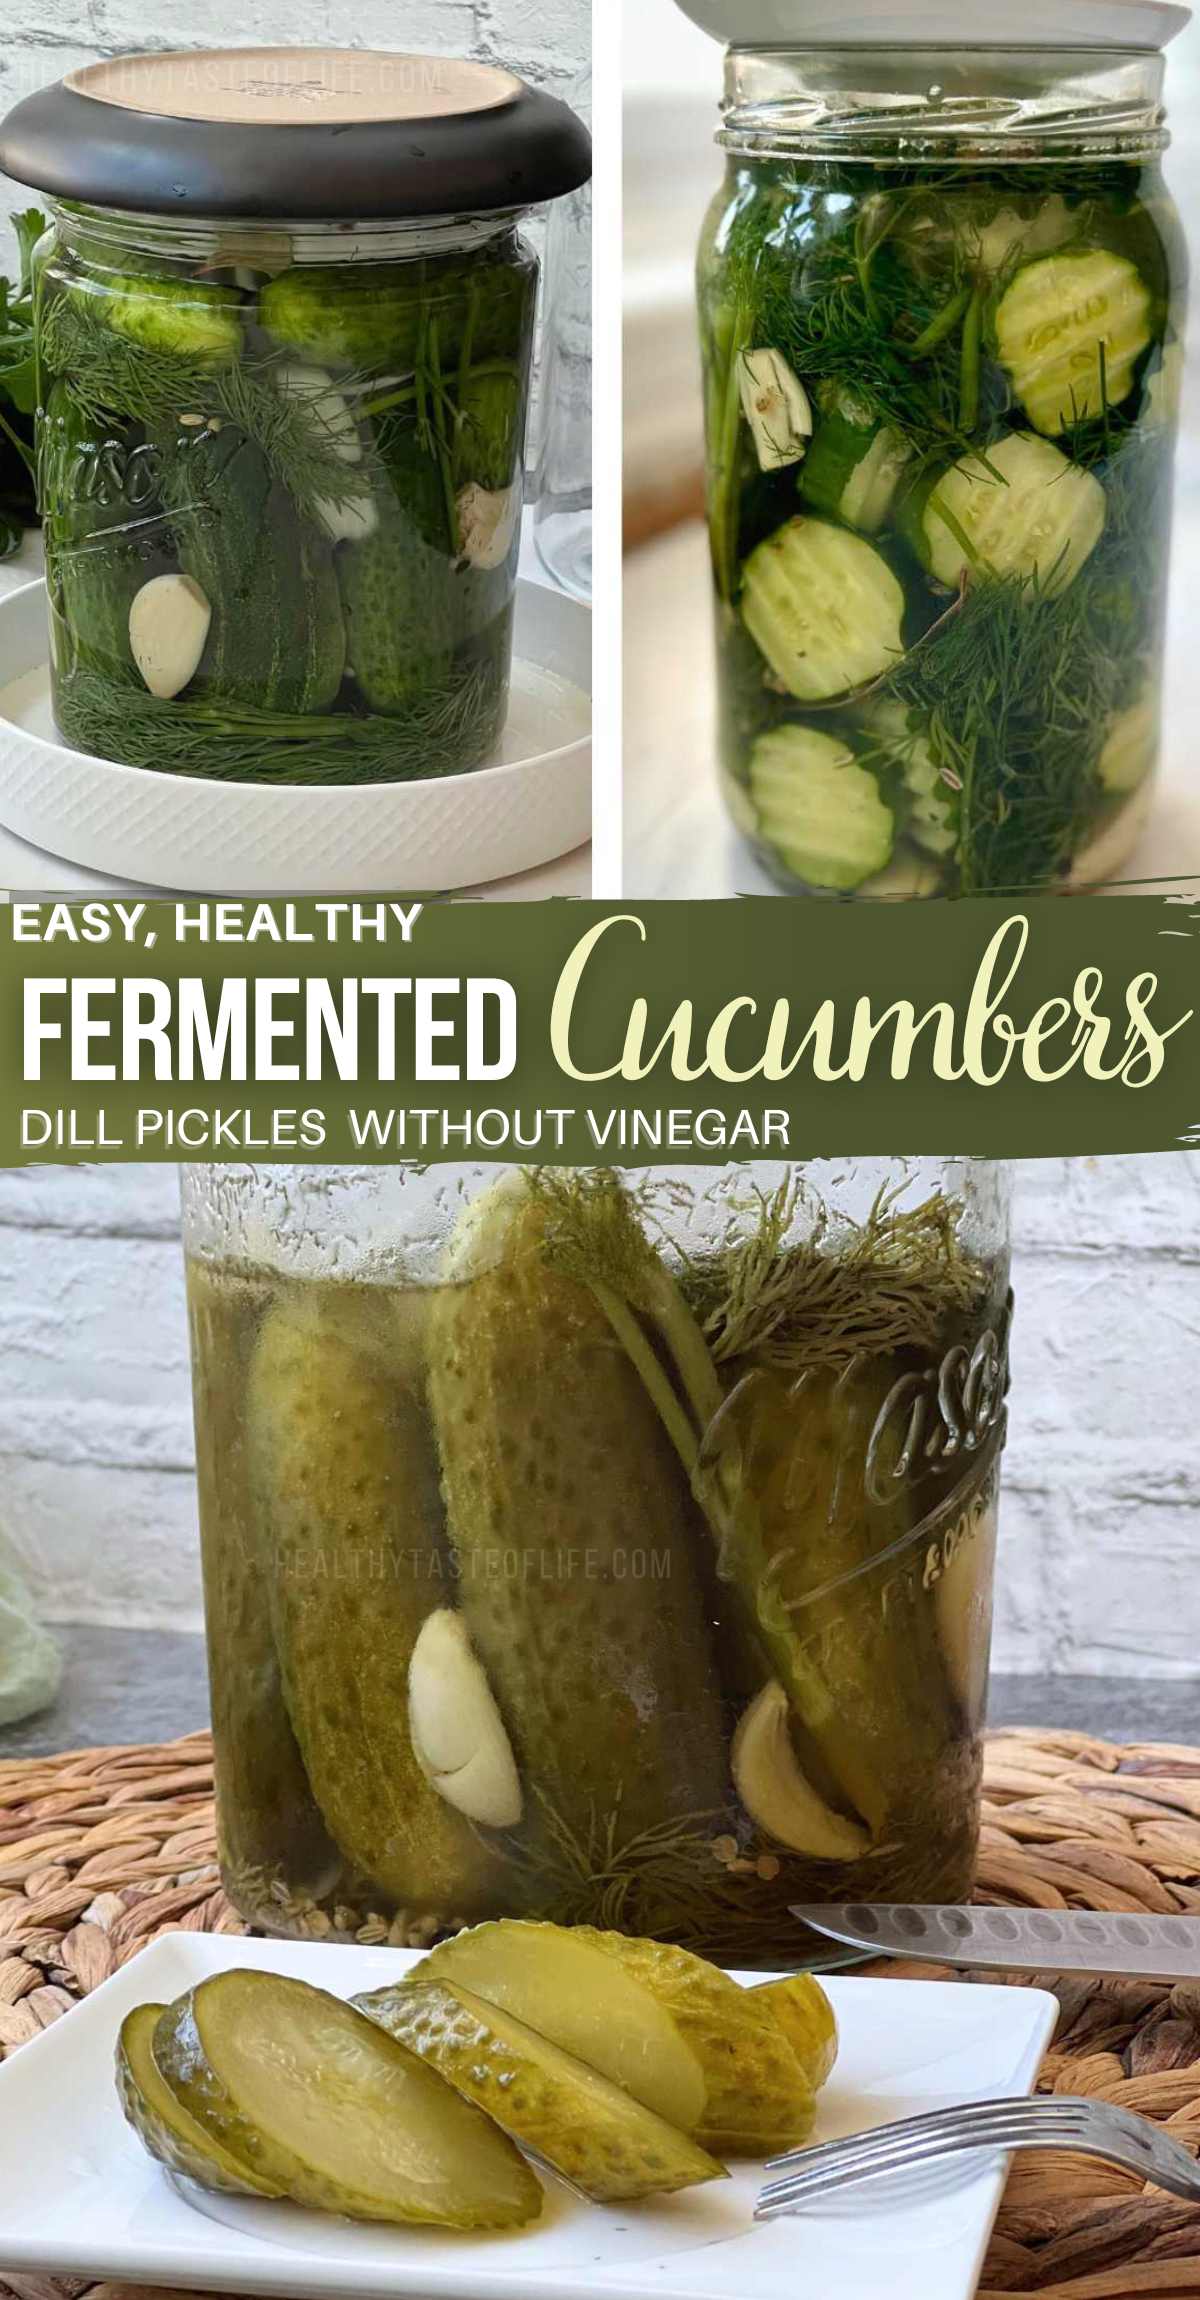 The authentic taste of naturally fermented cucumbers - vinegar-free dill pickles recipe. With this easy-to-follow fermented pickles recipe, you'll get the taste of authentic naturally lacto-fermented pickles with gut-healthy benefits that boosts immunity. Ferment cucumbers the simple, old-fashioned way, skip the vinegar and let nature do its magic. 